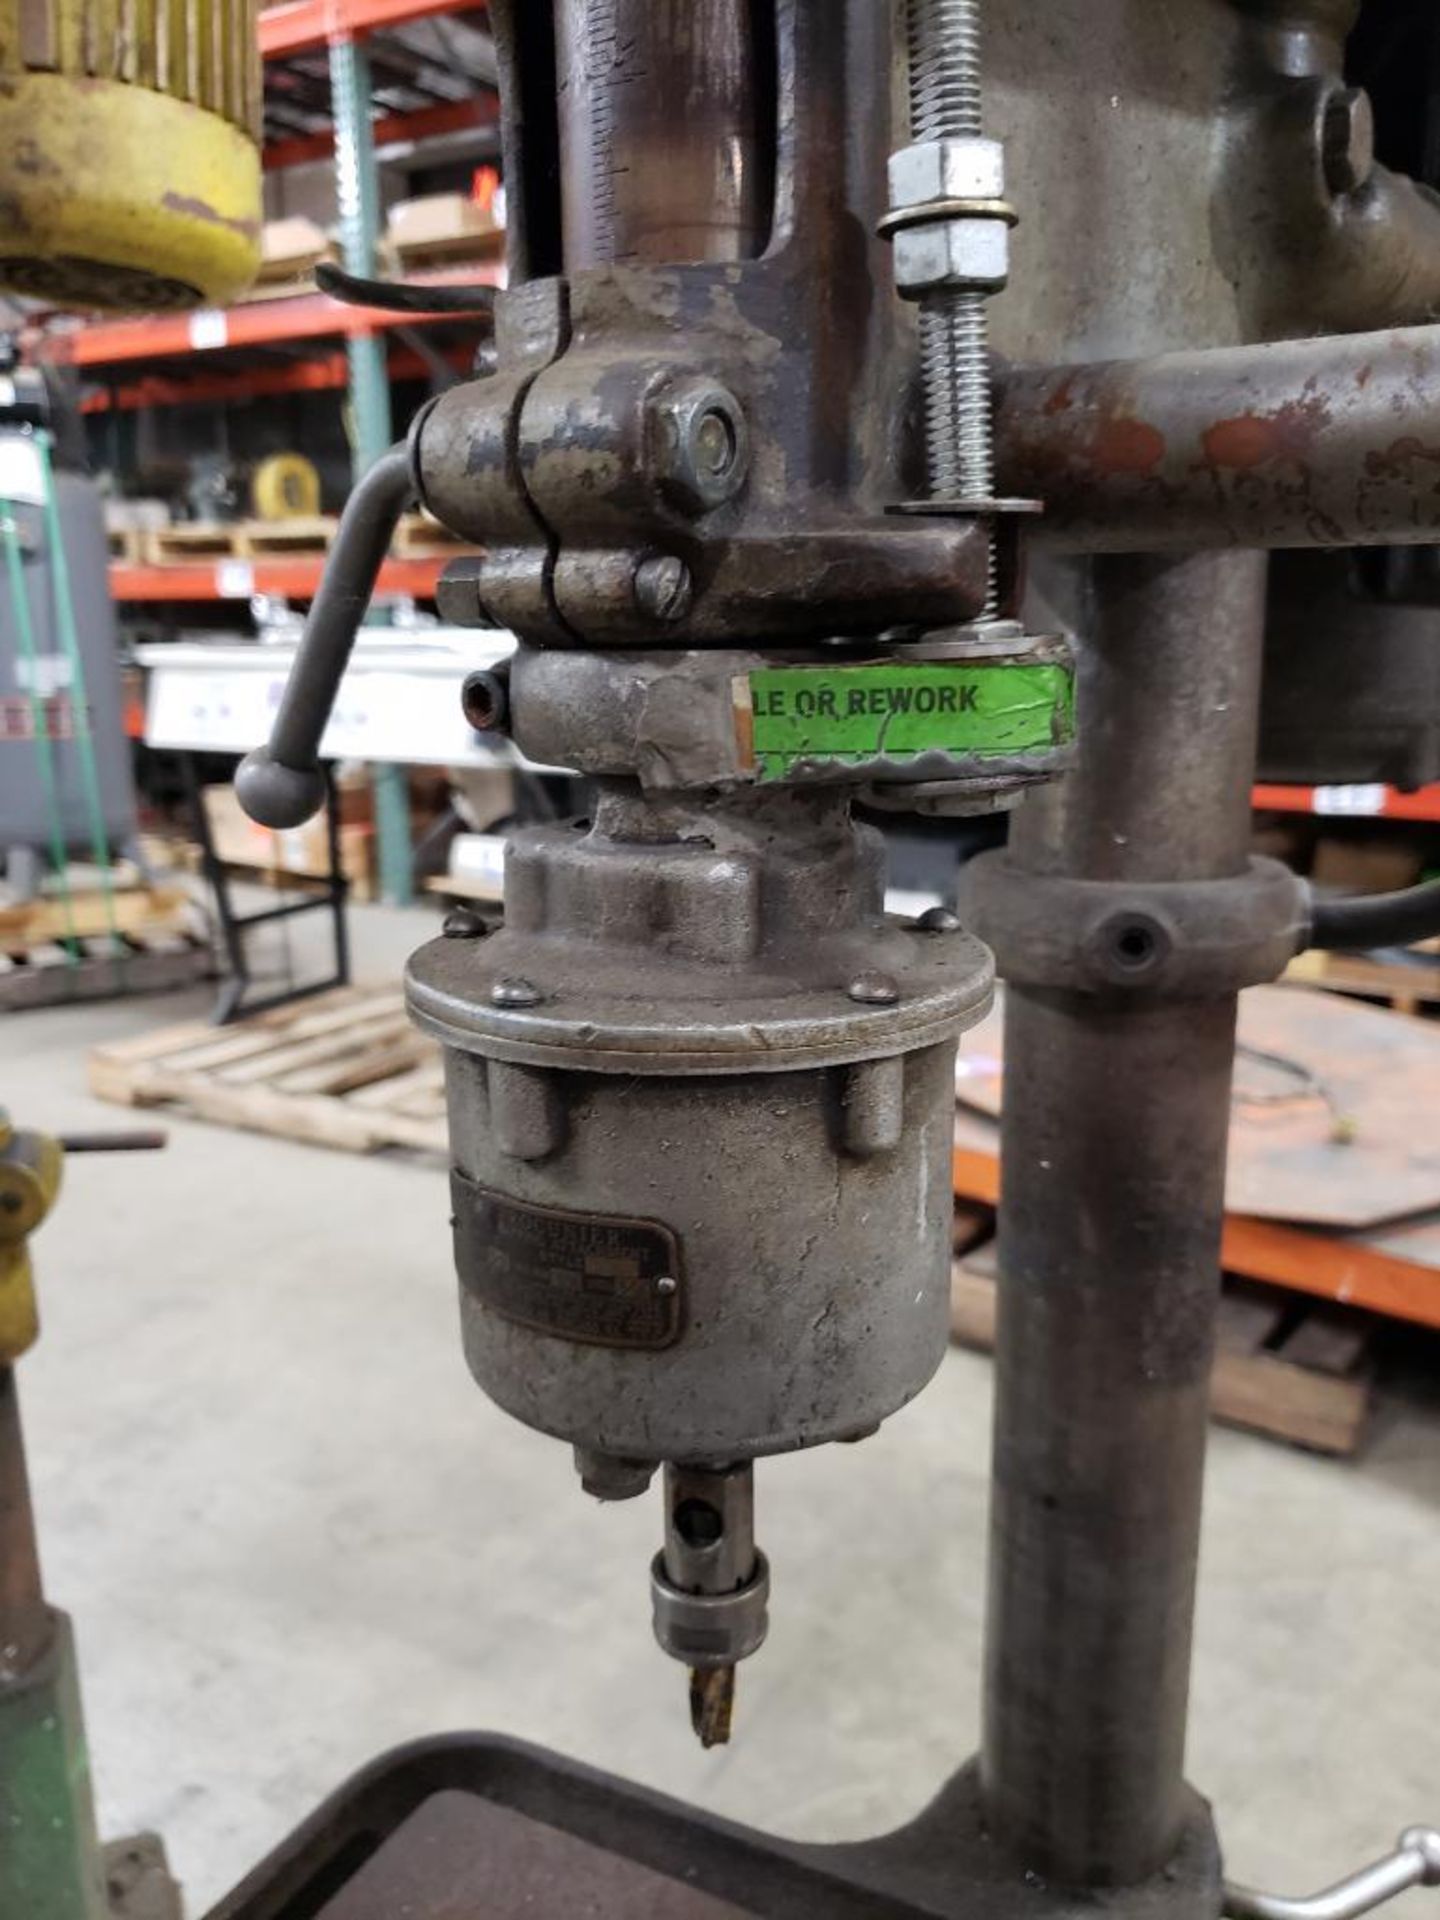 1/2hp Milwaukee Delta drill press with tapping head. 115v single phase. - Image 3 of 10